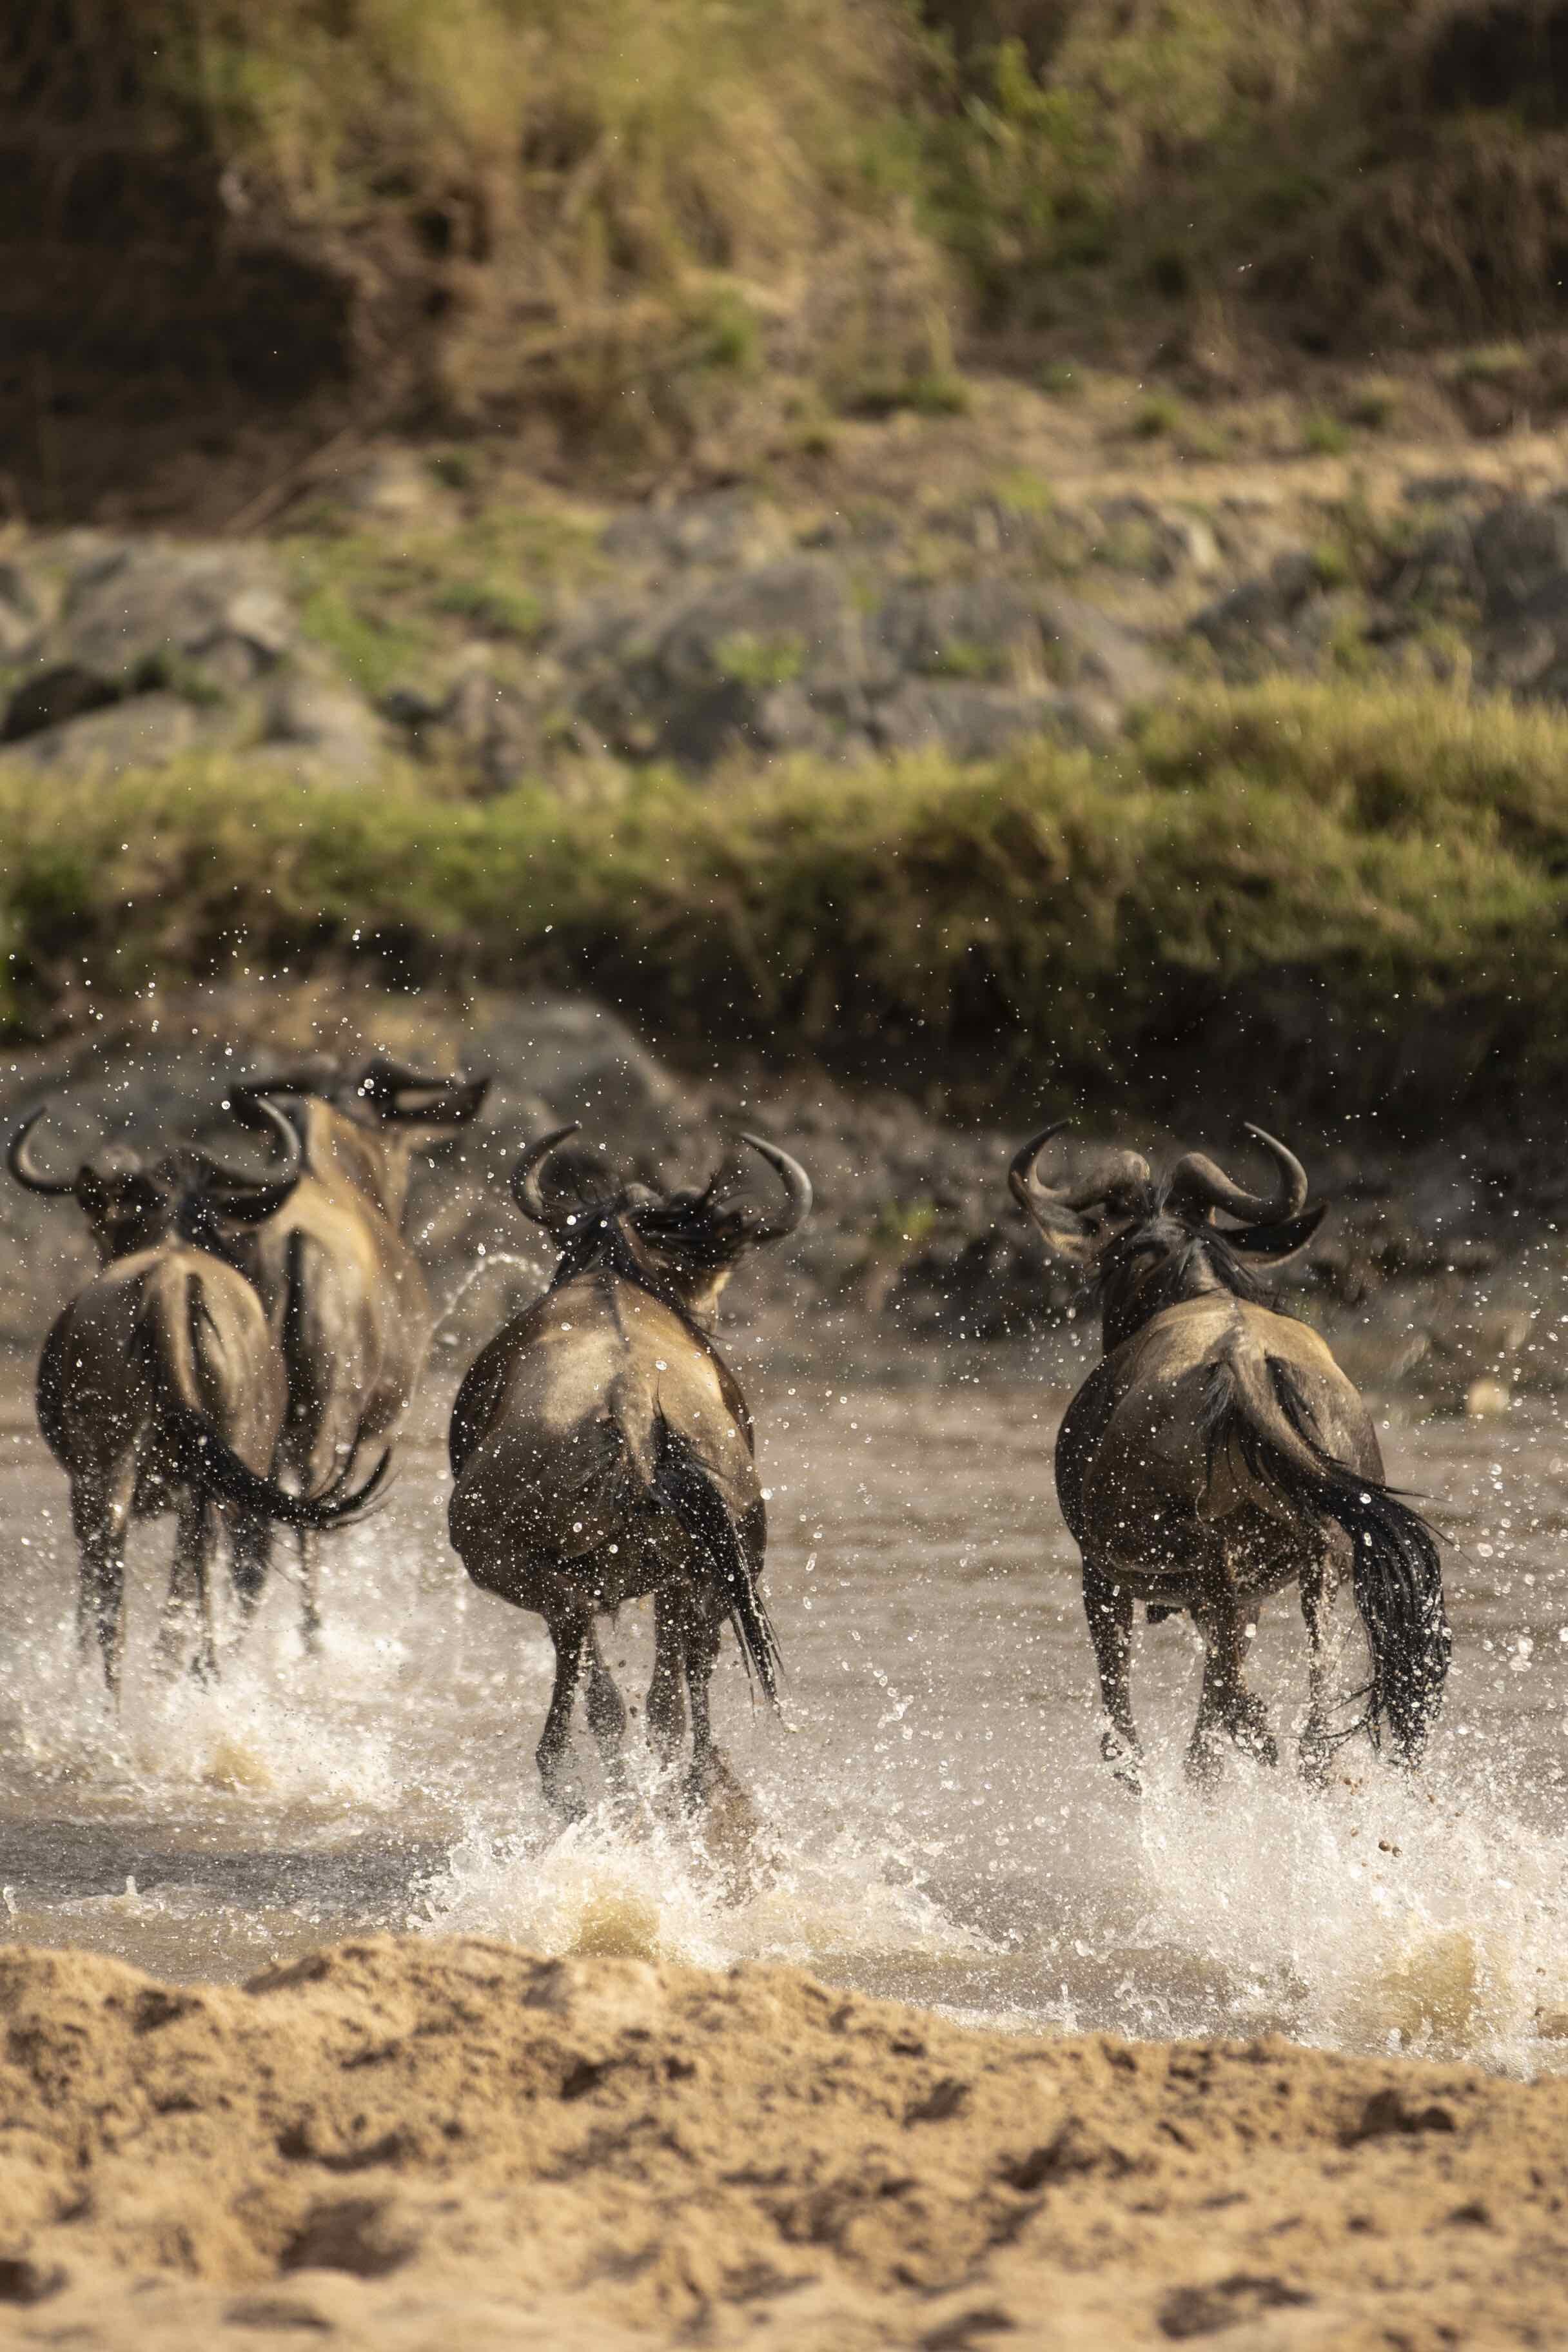 Wildebeest crossing the sand river in the Masai Mara